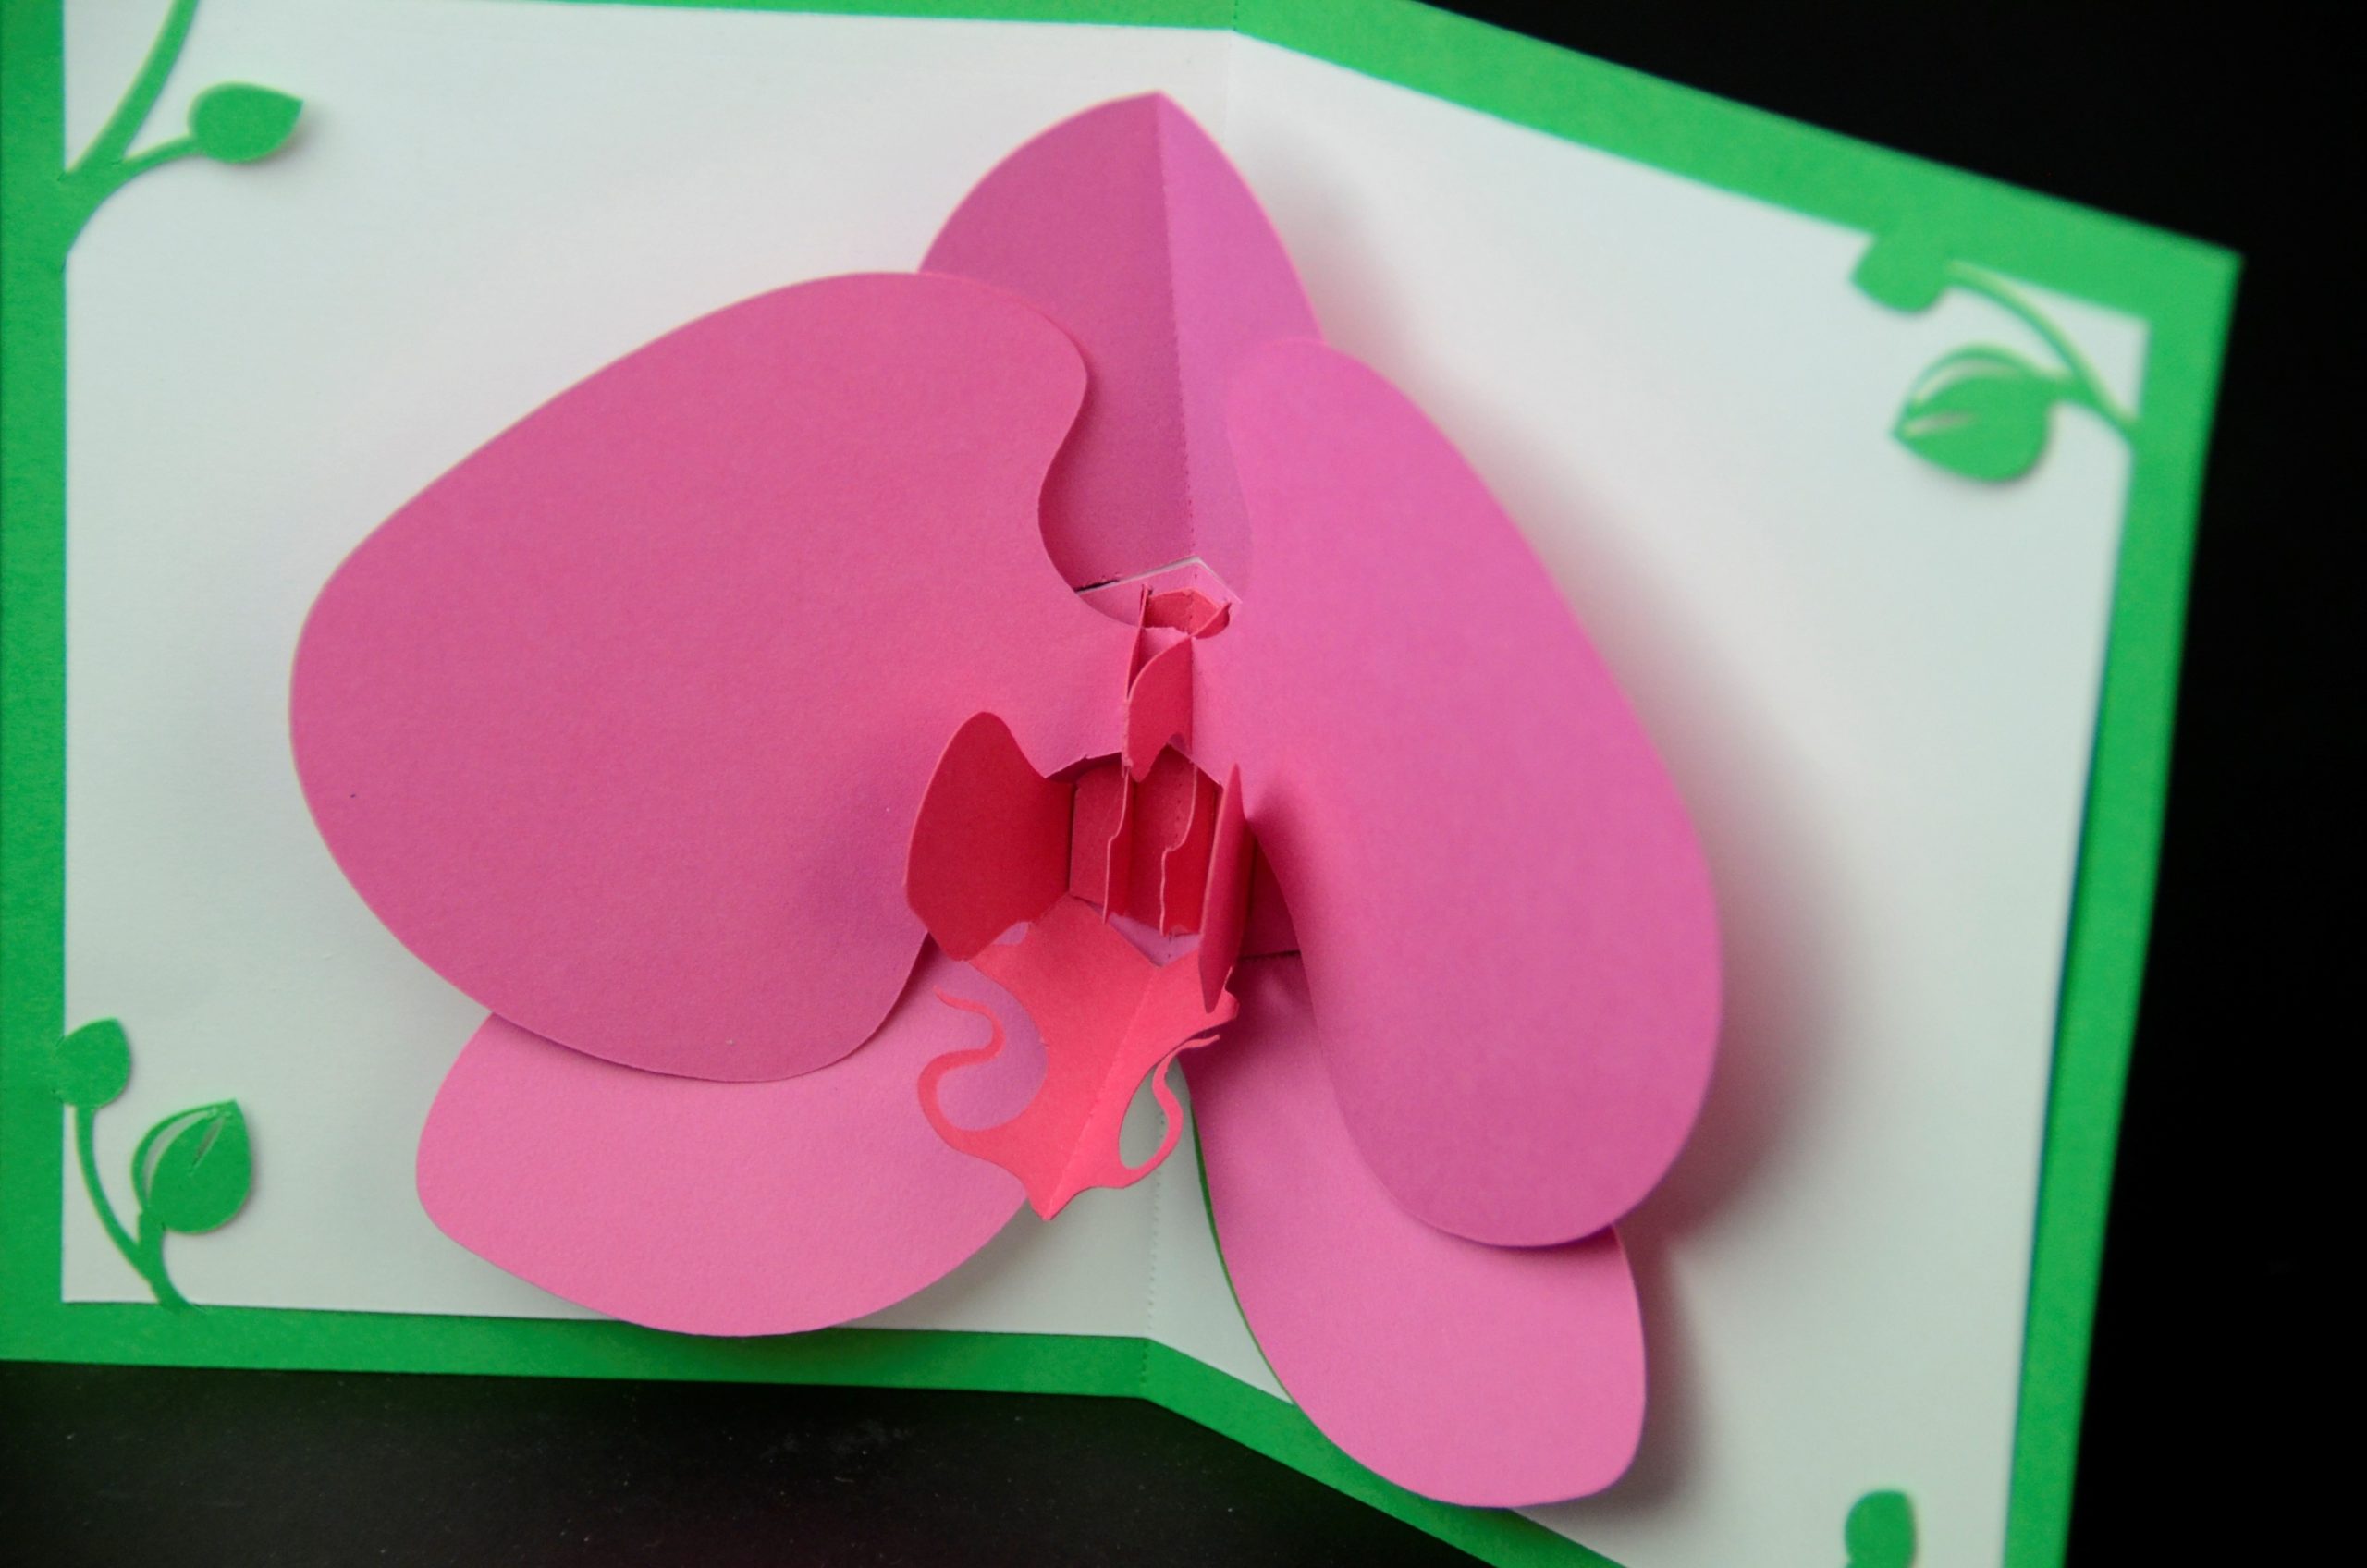 Mothers Day Pop Up Cards Printable - Free Mother'S Day Pop Up Card Template And Tutorial / They regarding Templates For Pop Up Cards Free